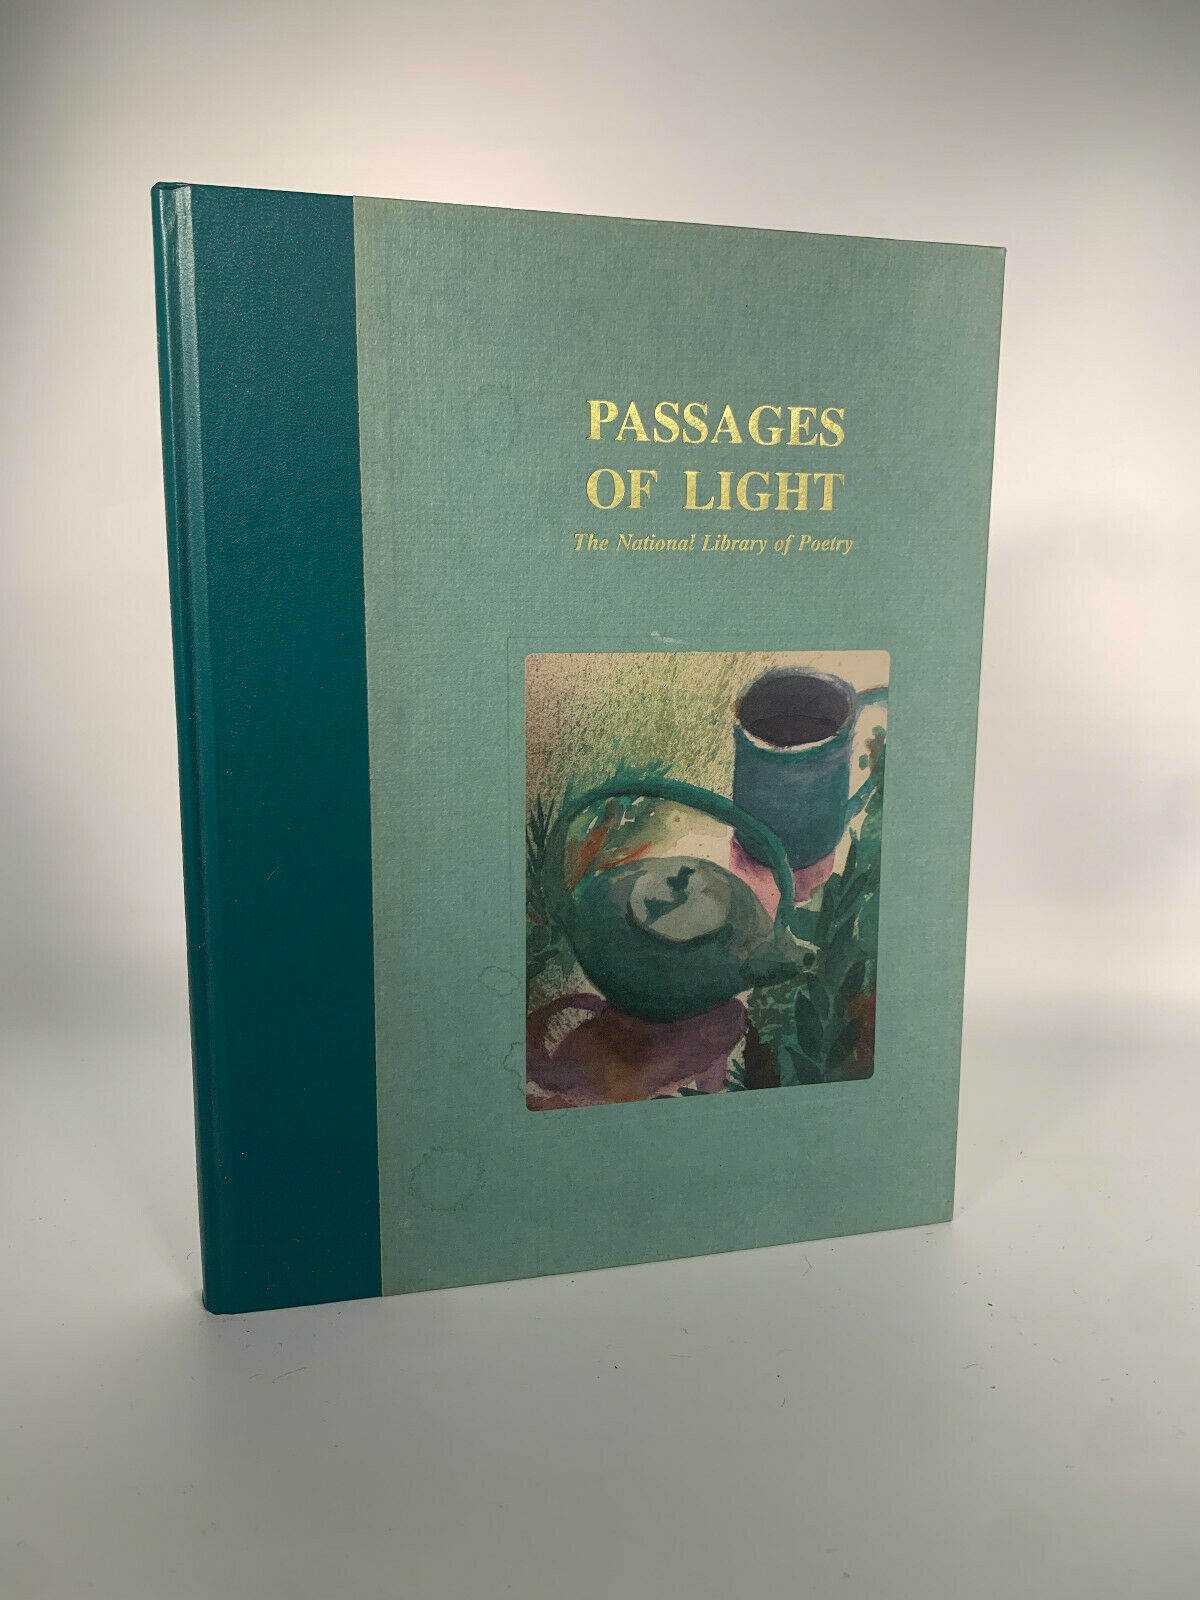 Passages of Light The National Library of Poetry w/ Editor's Choice Award